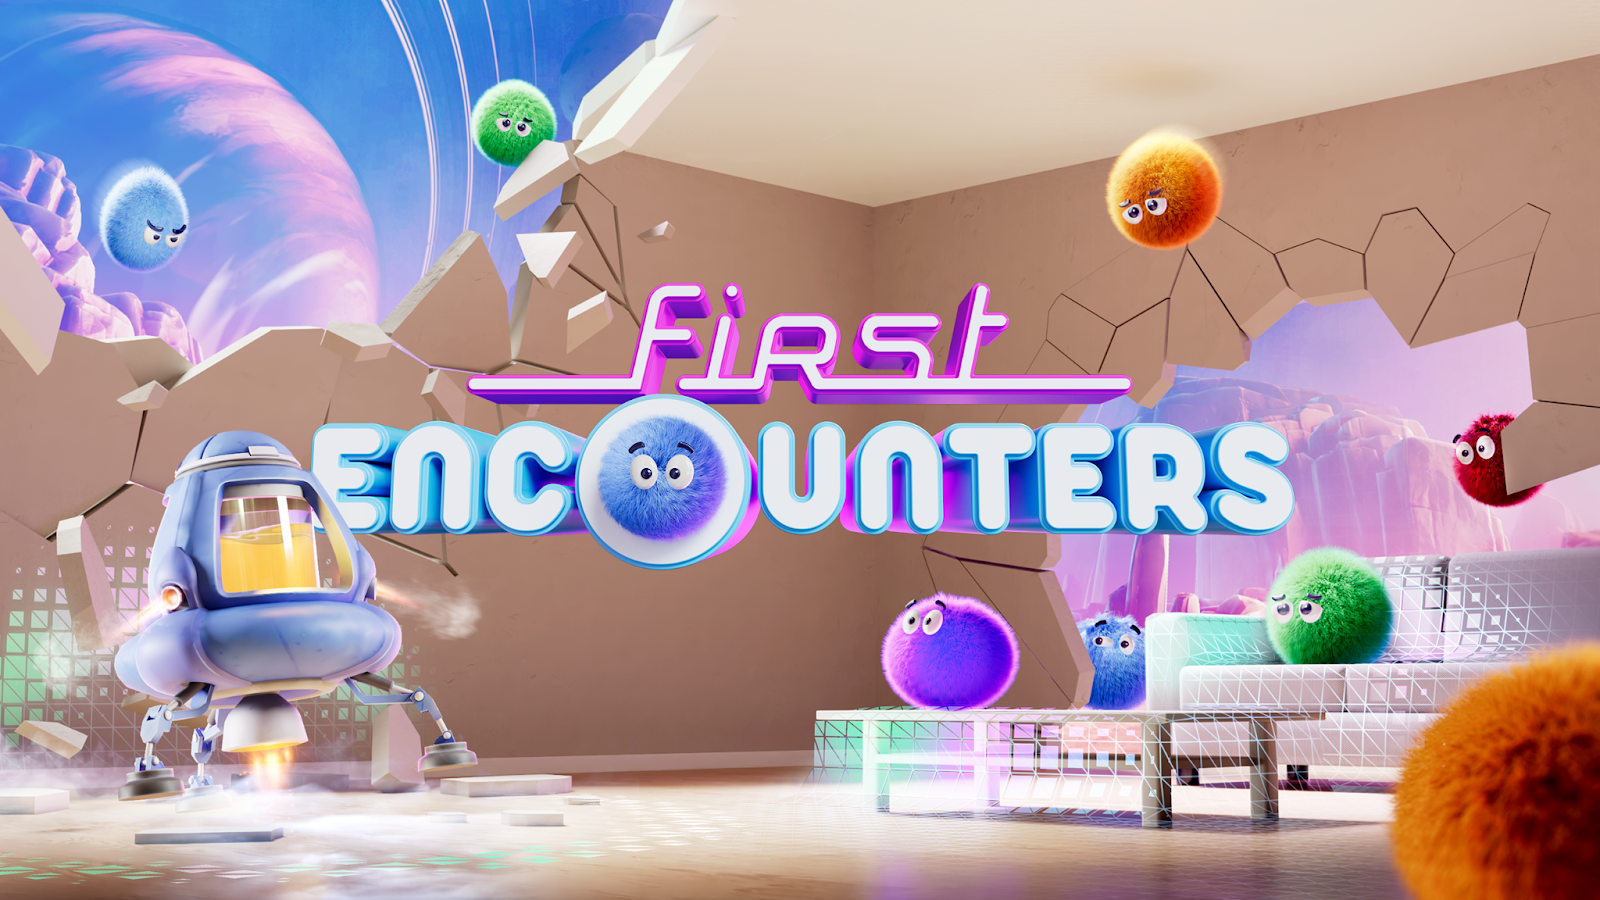 First Encounters mixed reality game